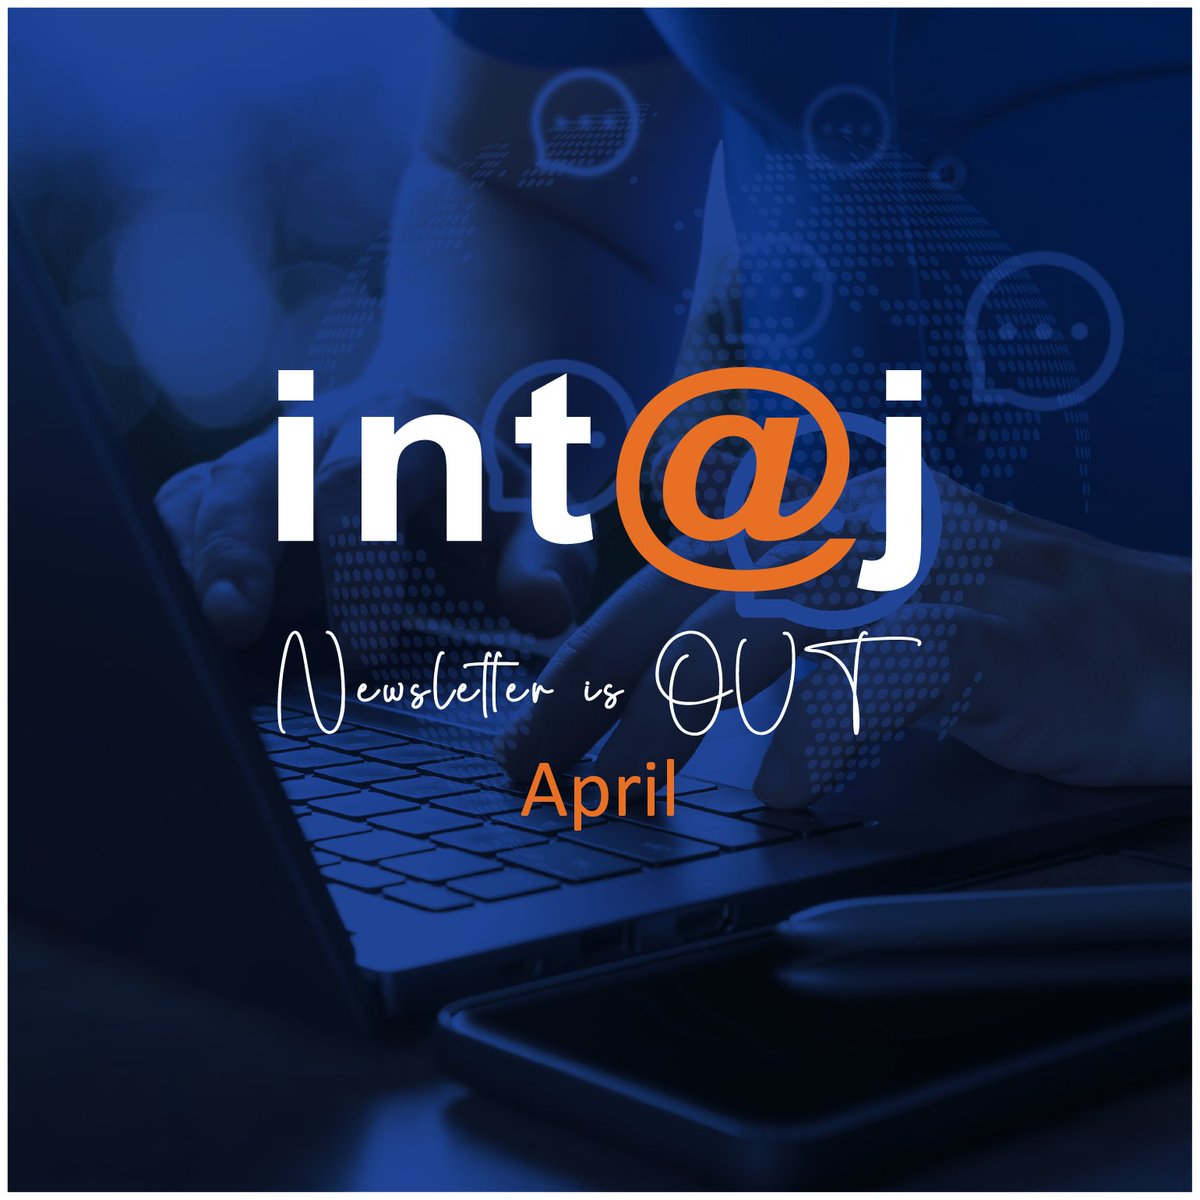 Exciting News! int@j 3rd week of #AprilNewsletter is OUT! Don't miss reading the latest & greatest of #intajNews,#MembersNews,#SectorNews,#Events, #Announcements & #RFPs listed in this week's newsletter👇 intaj.net/newsletters